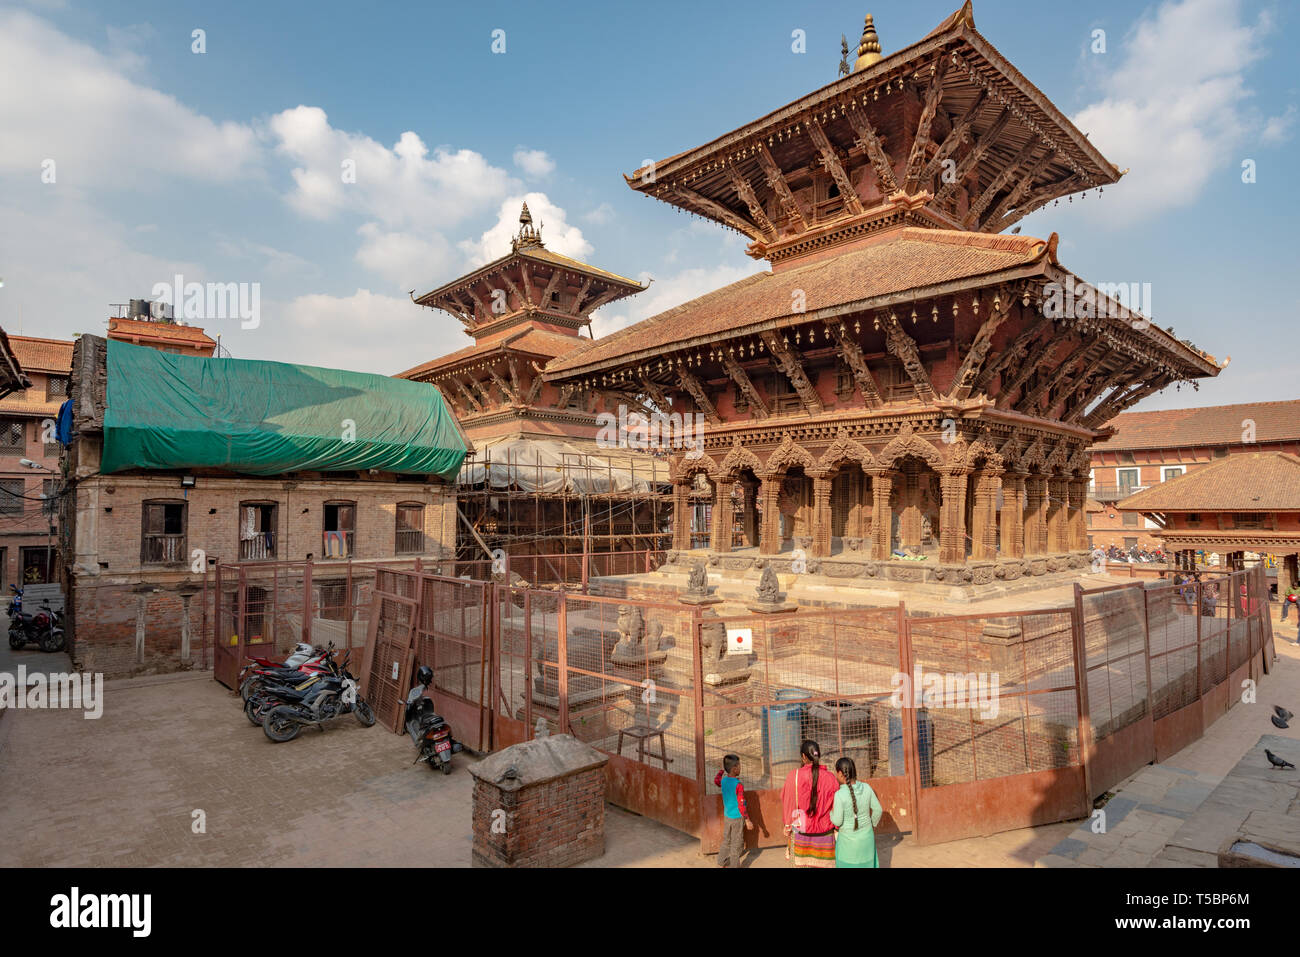 LALITPUR, PATAN, NEPAL - APRIL 3, 2019: Two temples in reconstruction after the 2015 earthquake on the Durbar Square of Patan Stock Photo